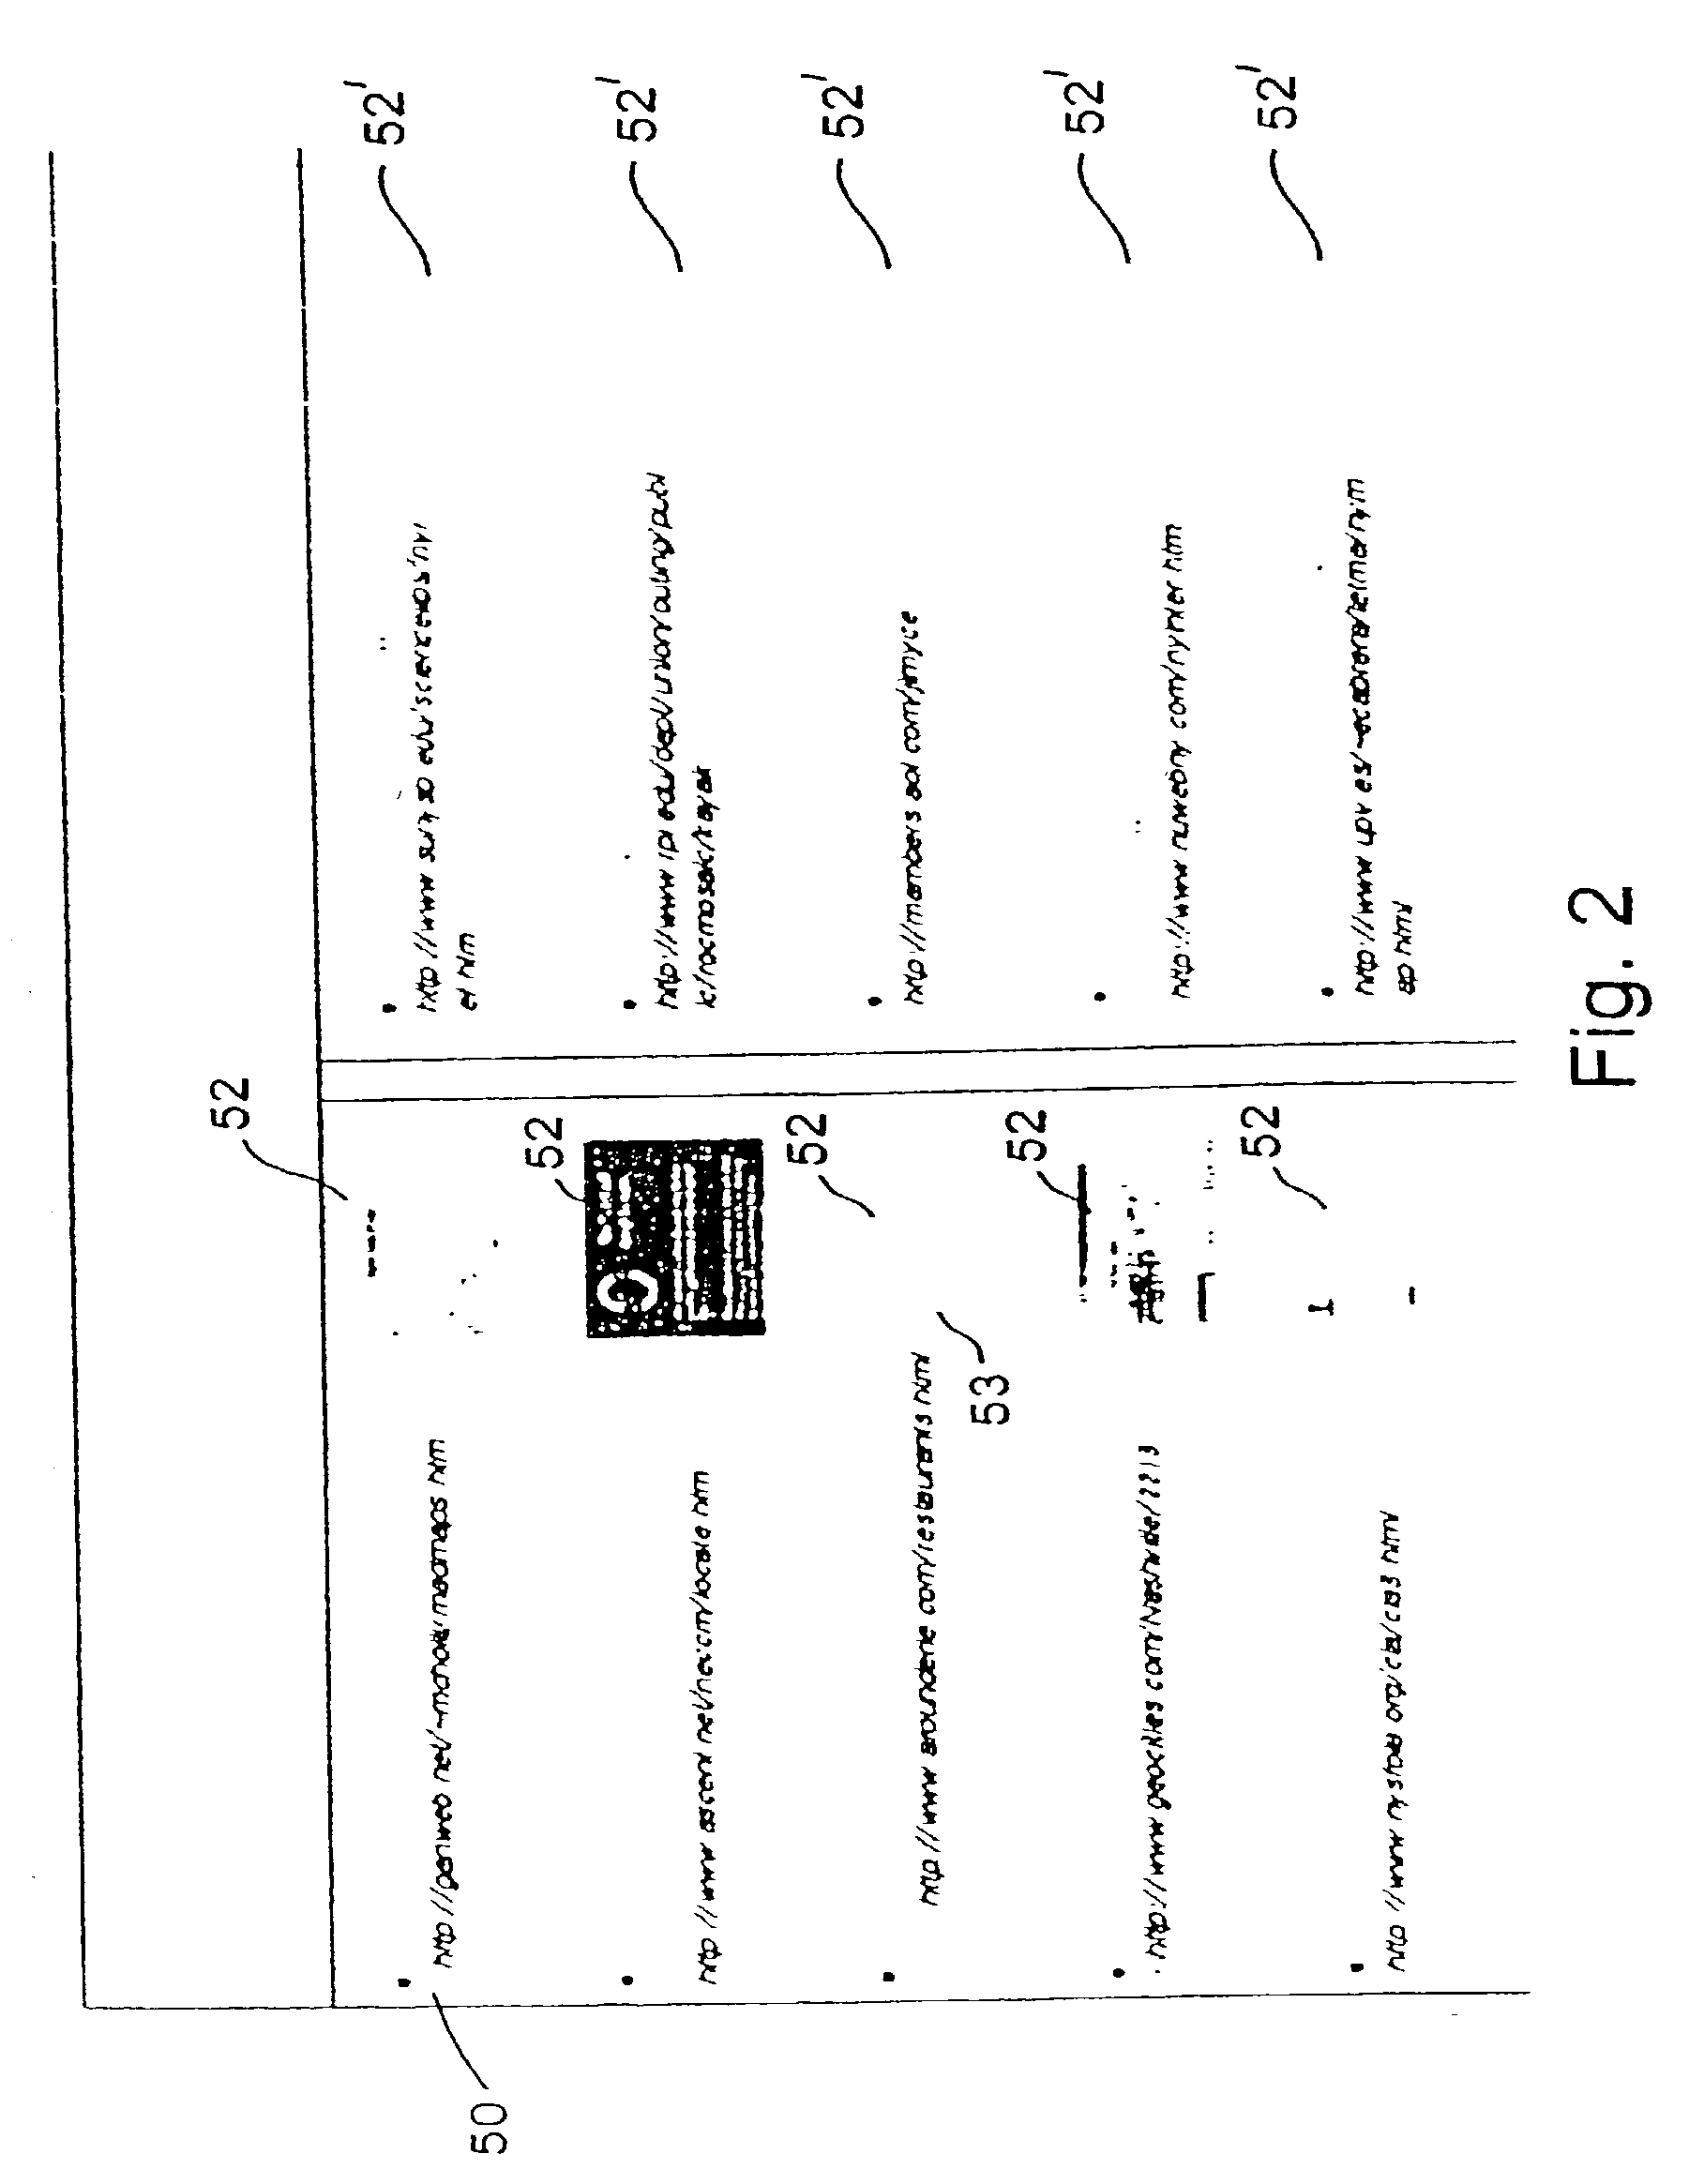 Systems and methods for generating and providing previews of electronic files such as web files